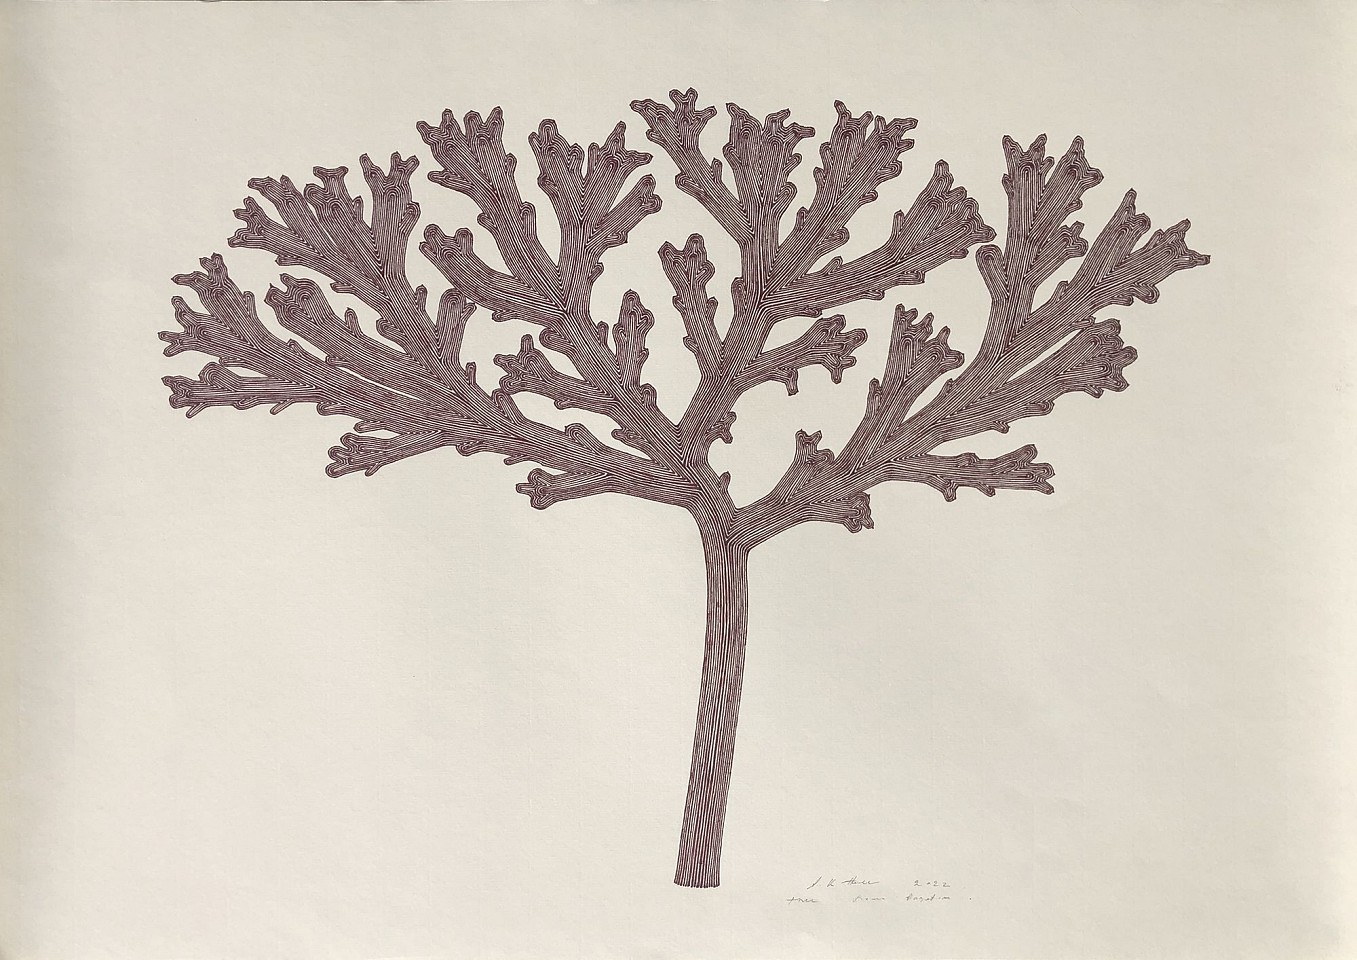 Stewart Helm, Bulb Growth, 2022
Brown ink on paper, 19.062"x 27.5"
SH-652
Price Upon Request